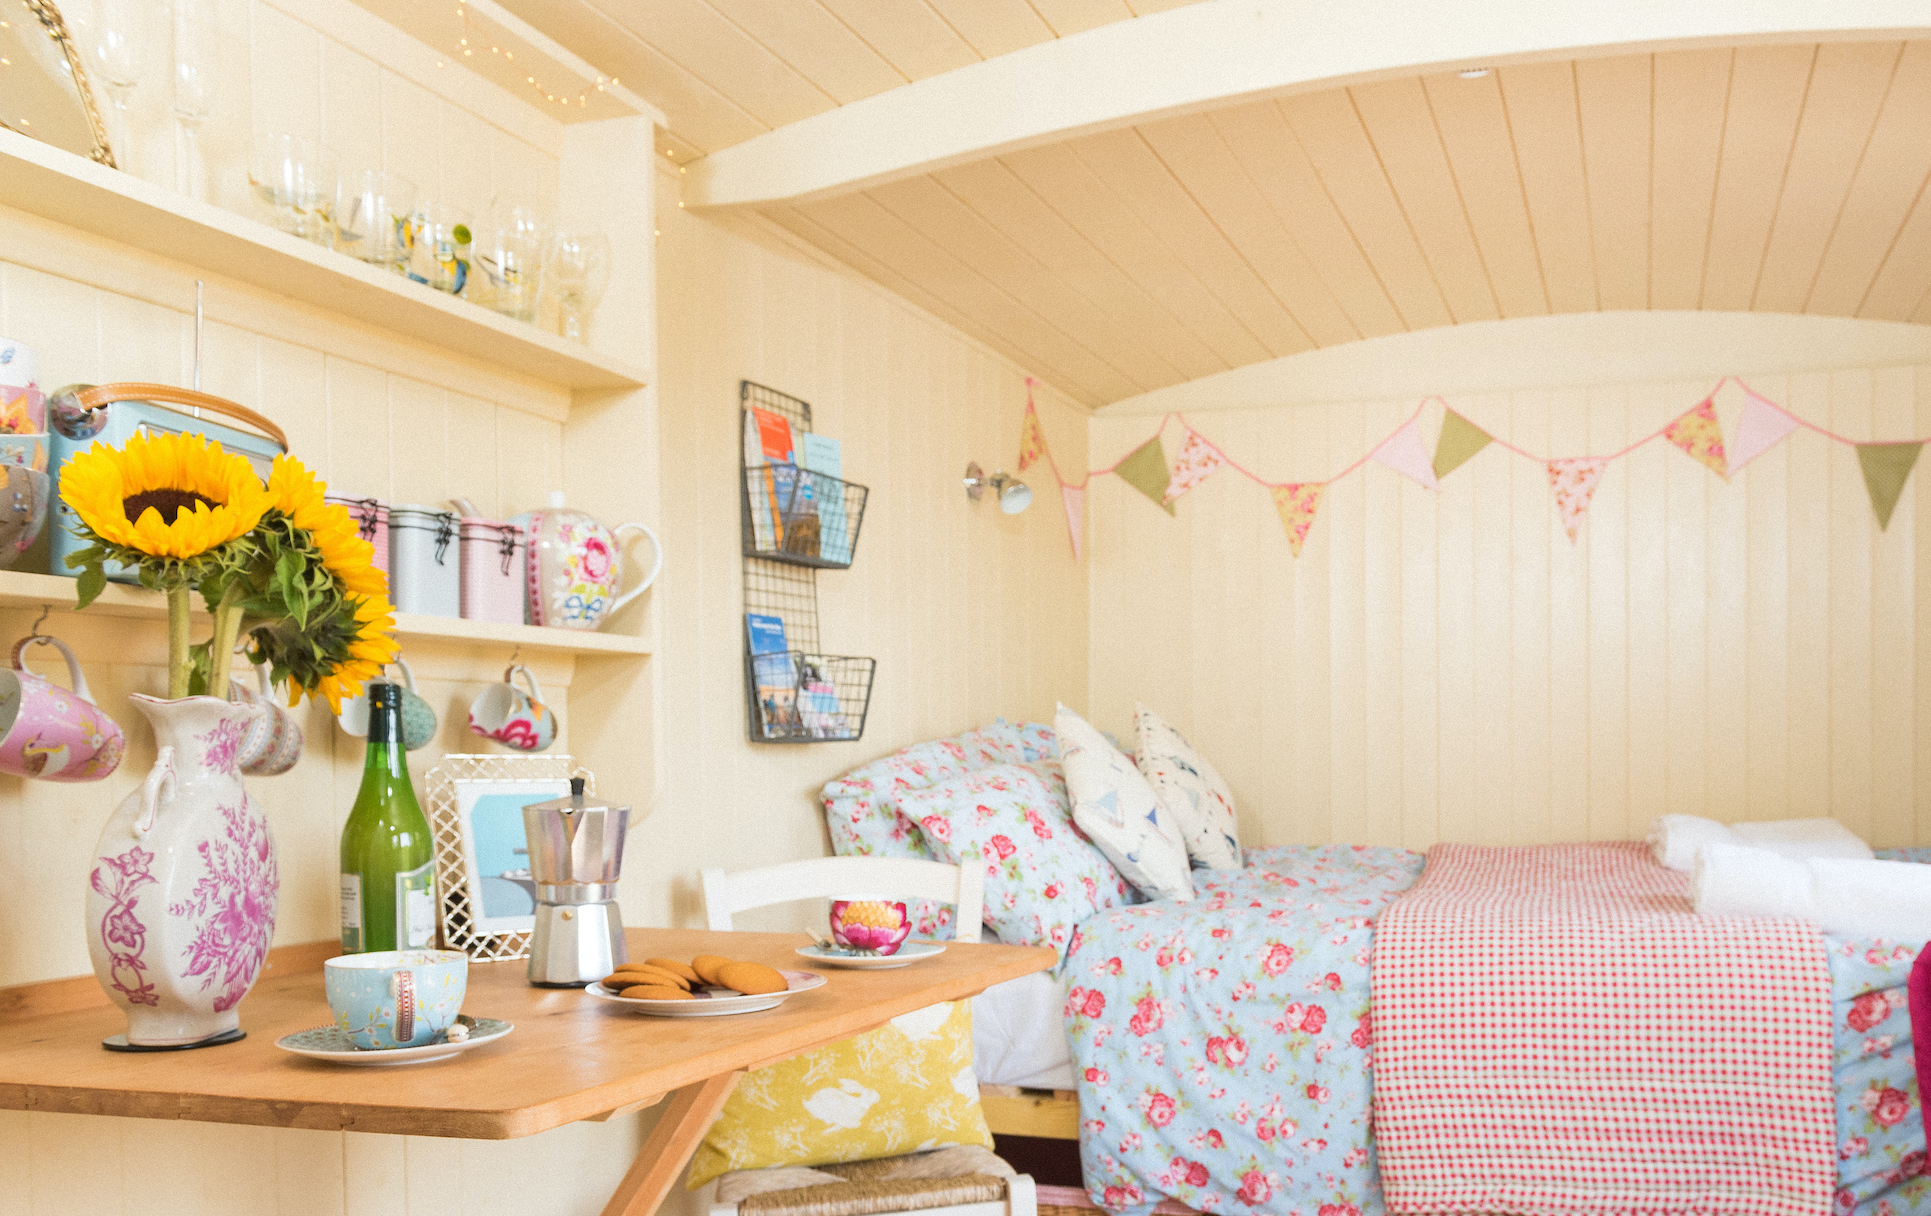 Shepherd's hut interior for self-catering holiday accommodation